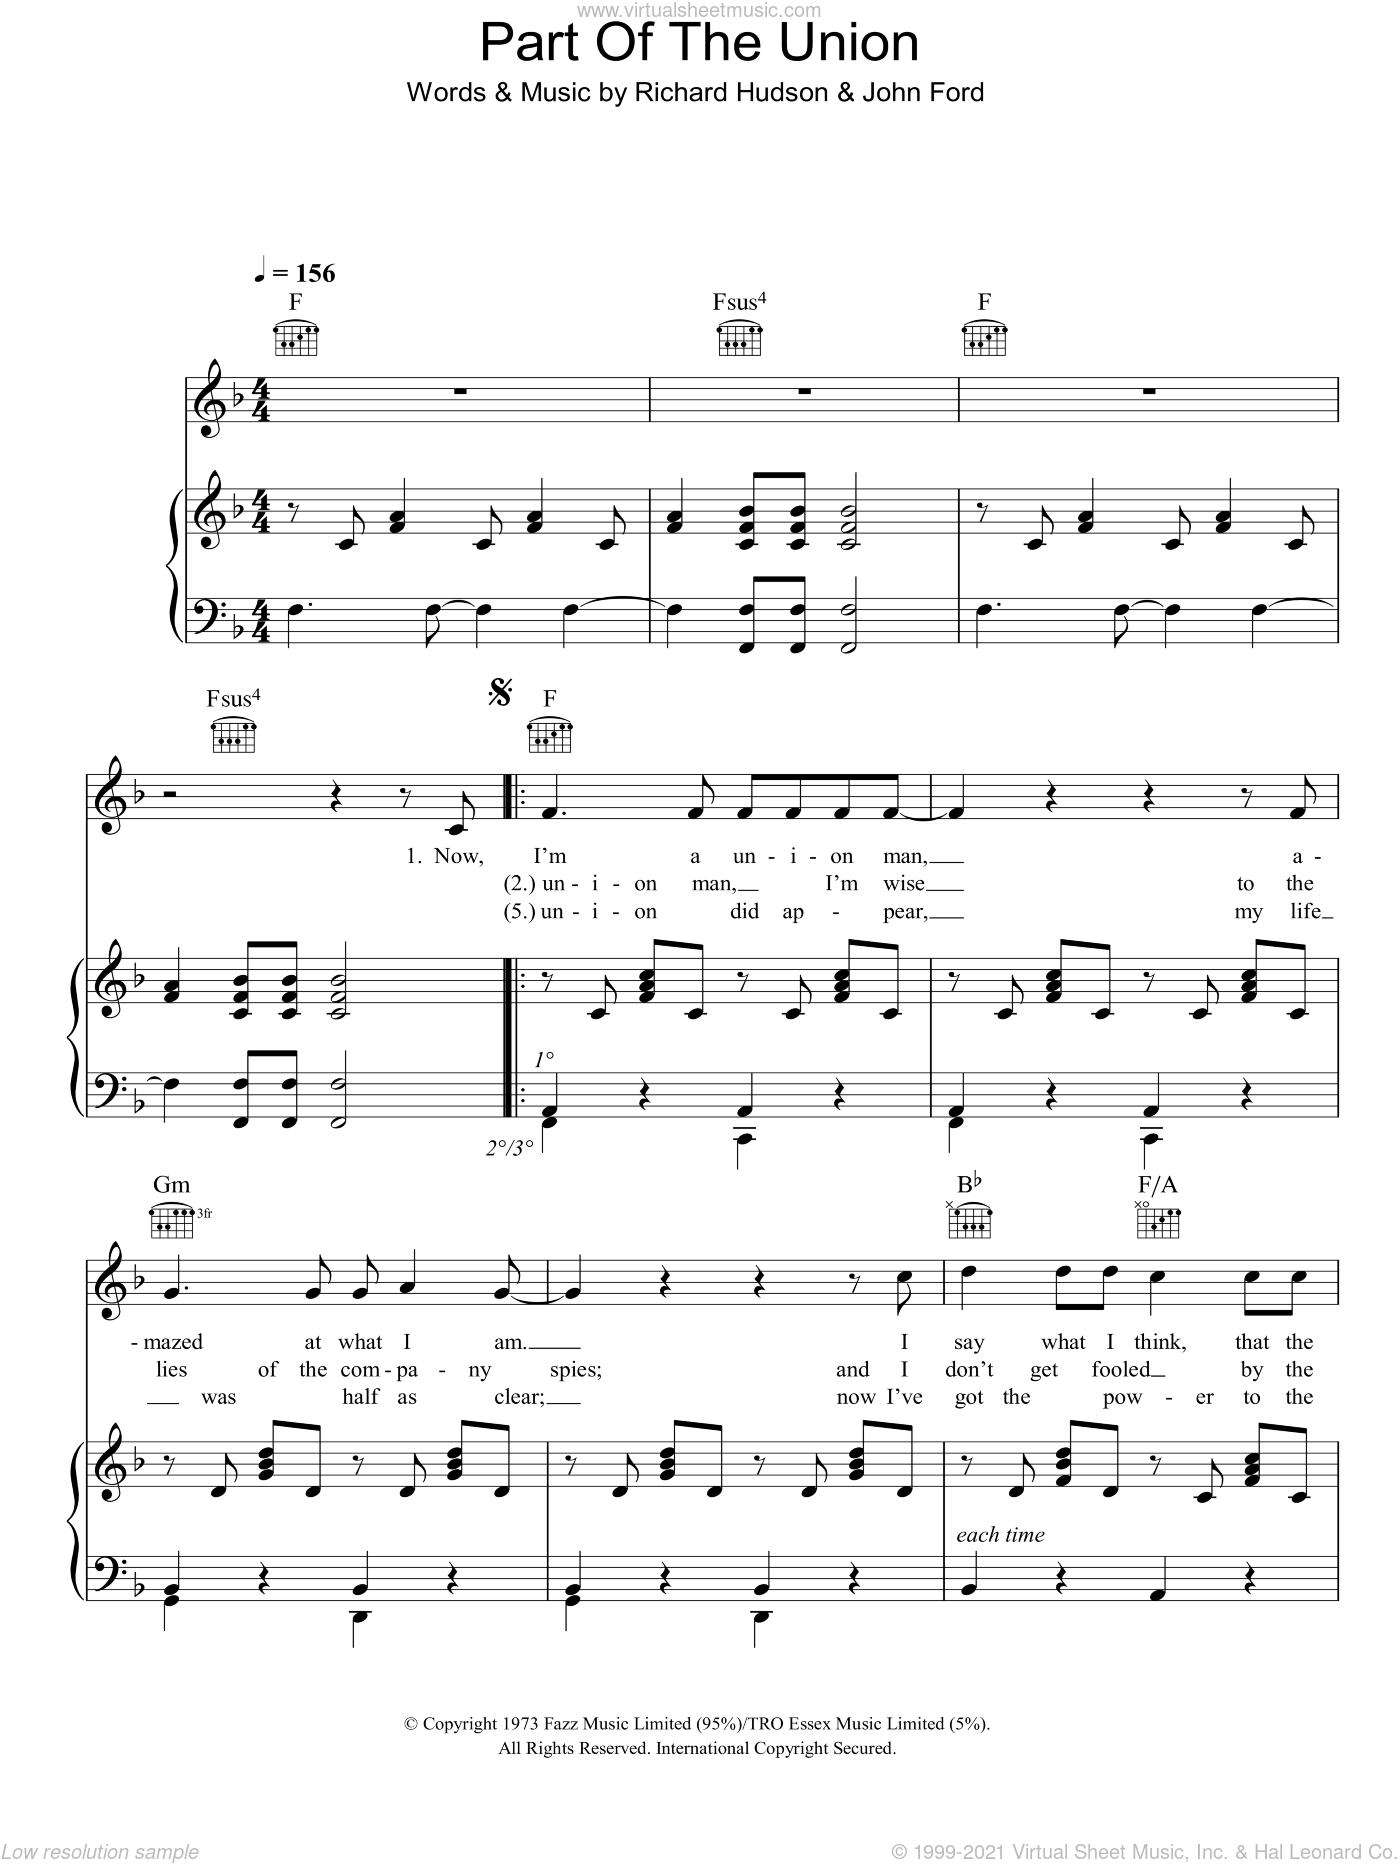 Part Of The Union sheet music for voice, piano or guitar (PDF)